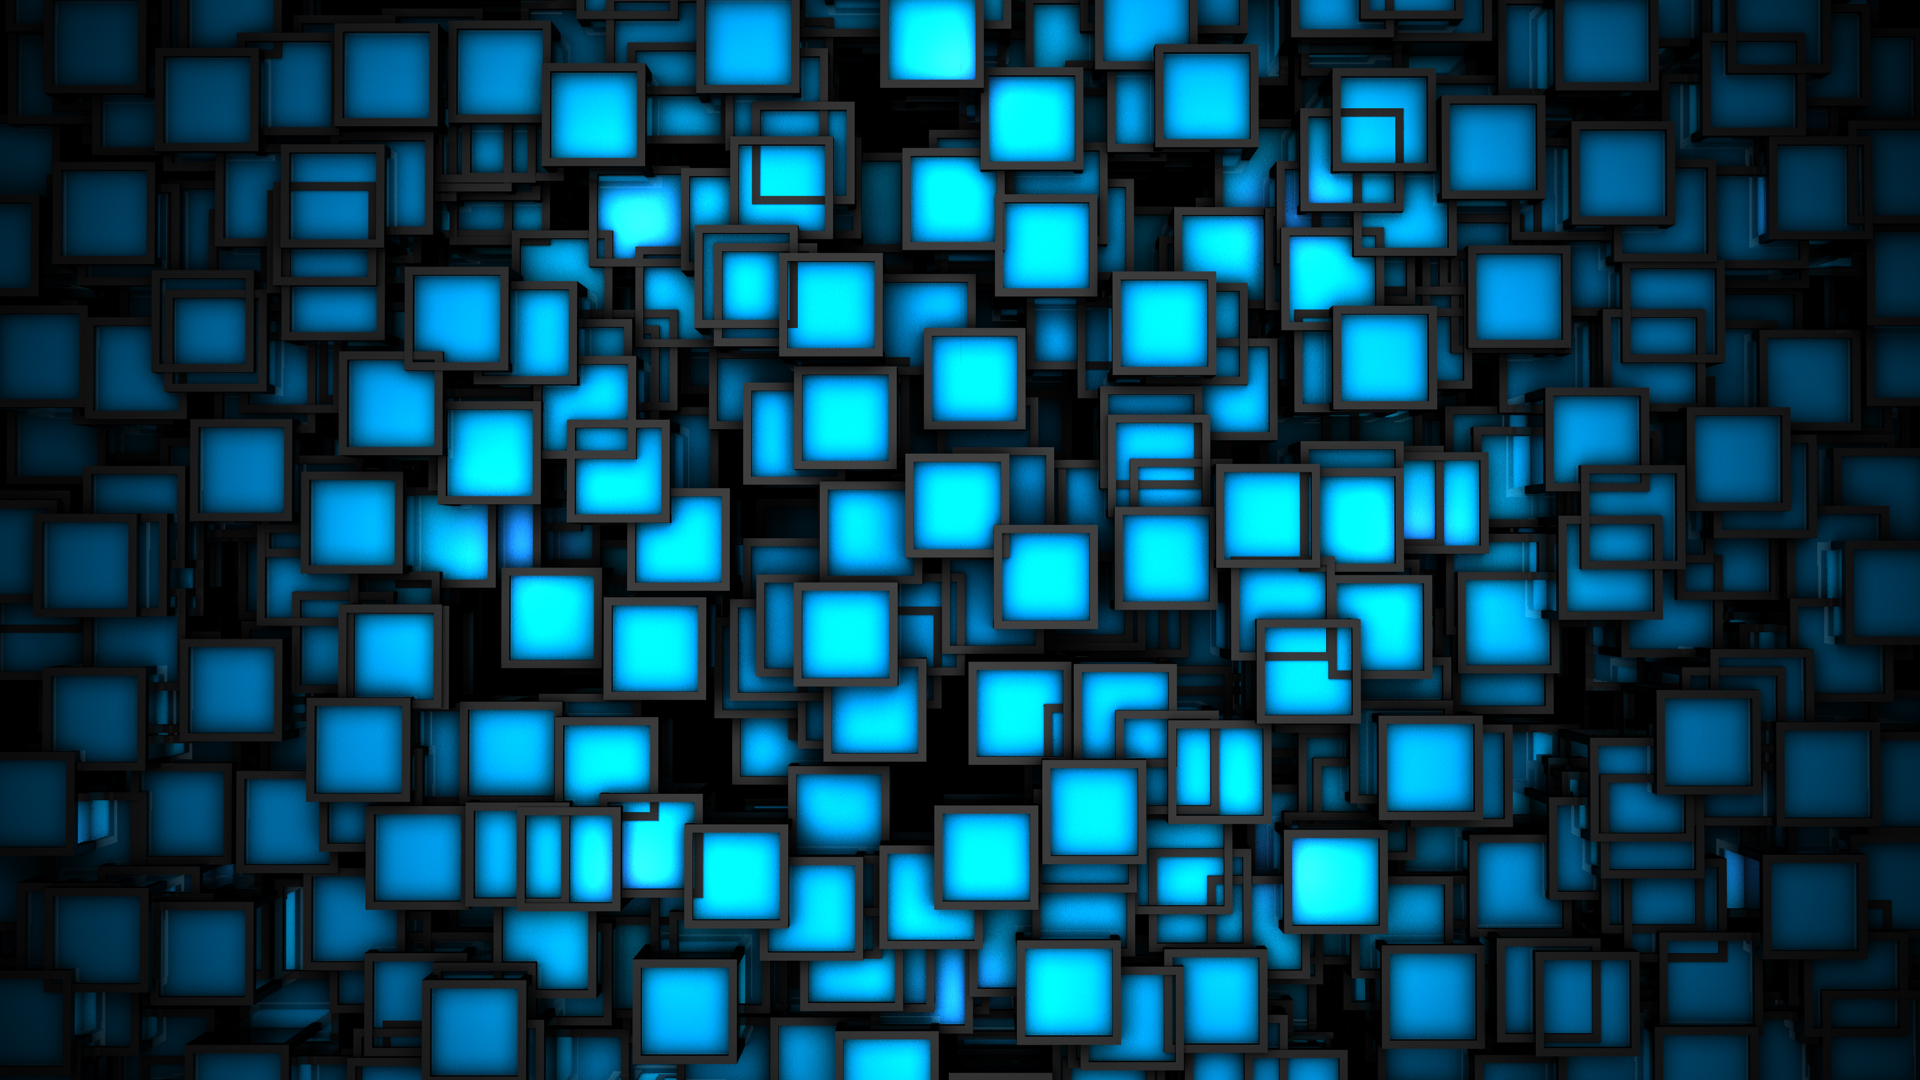 Neon Squares Wallpapers HD Wallpapers 1920x1080